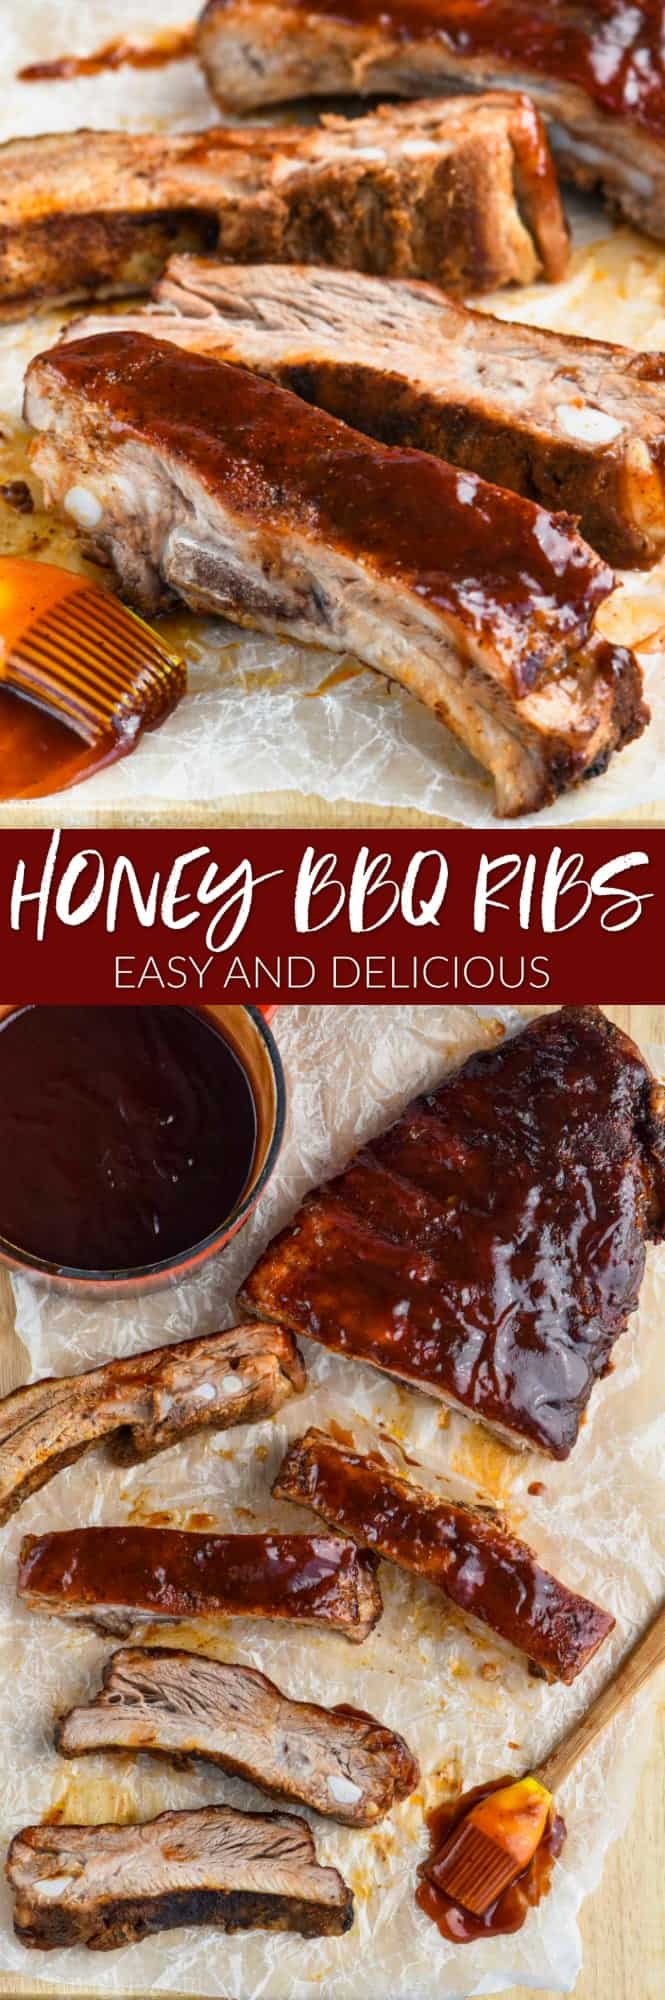 collage of photos of honey bbq ribs recipe